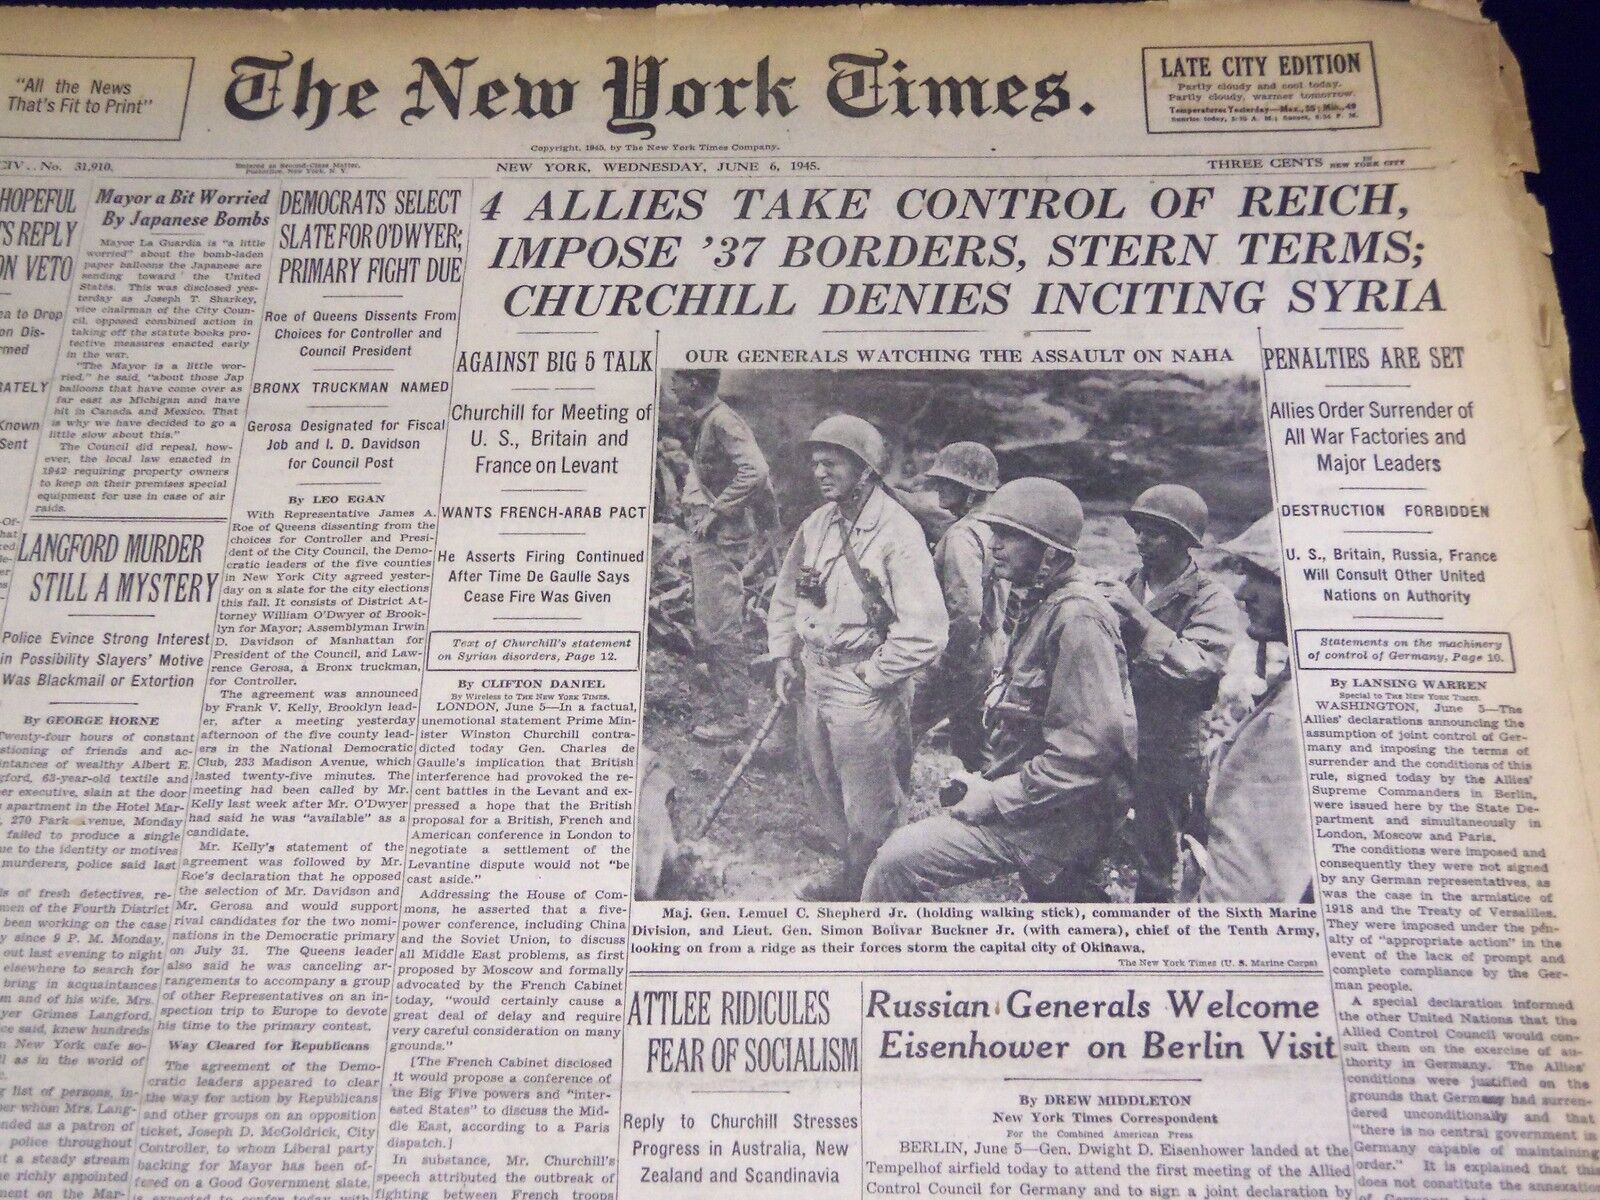 1945 JUNE 6 NEW YORK TIMES - 4 ALLIES TAKE CONTROL OF REICH - NT 638